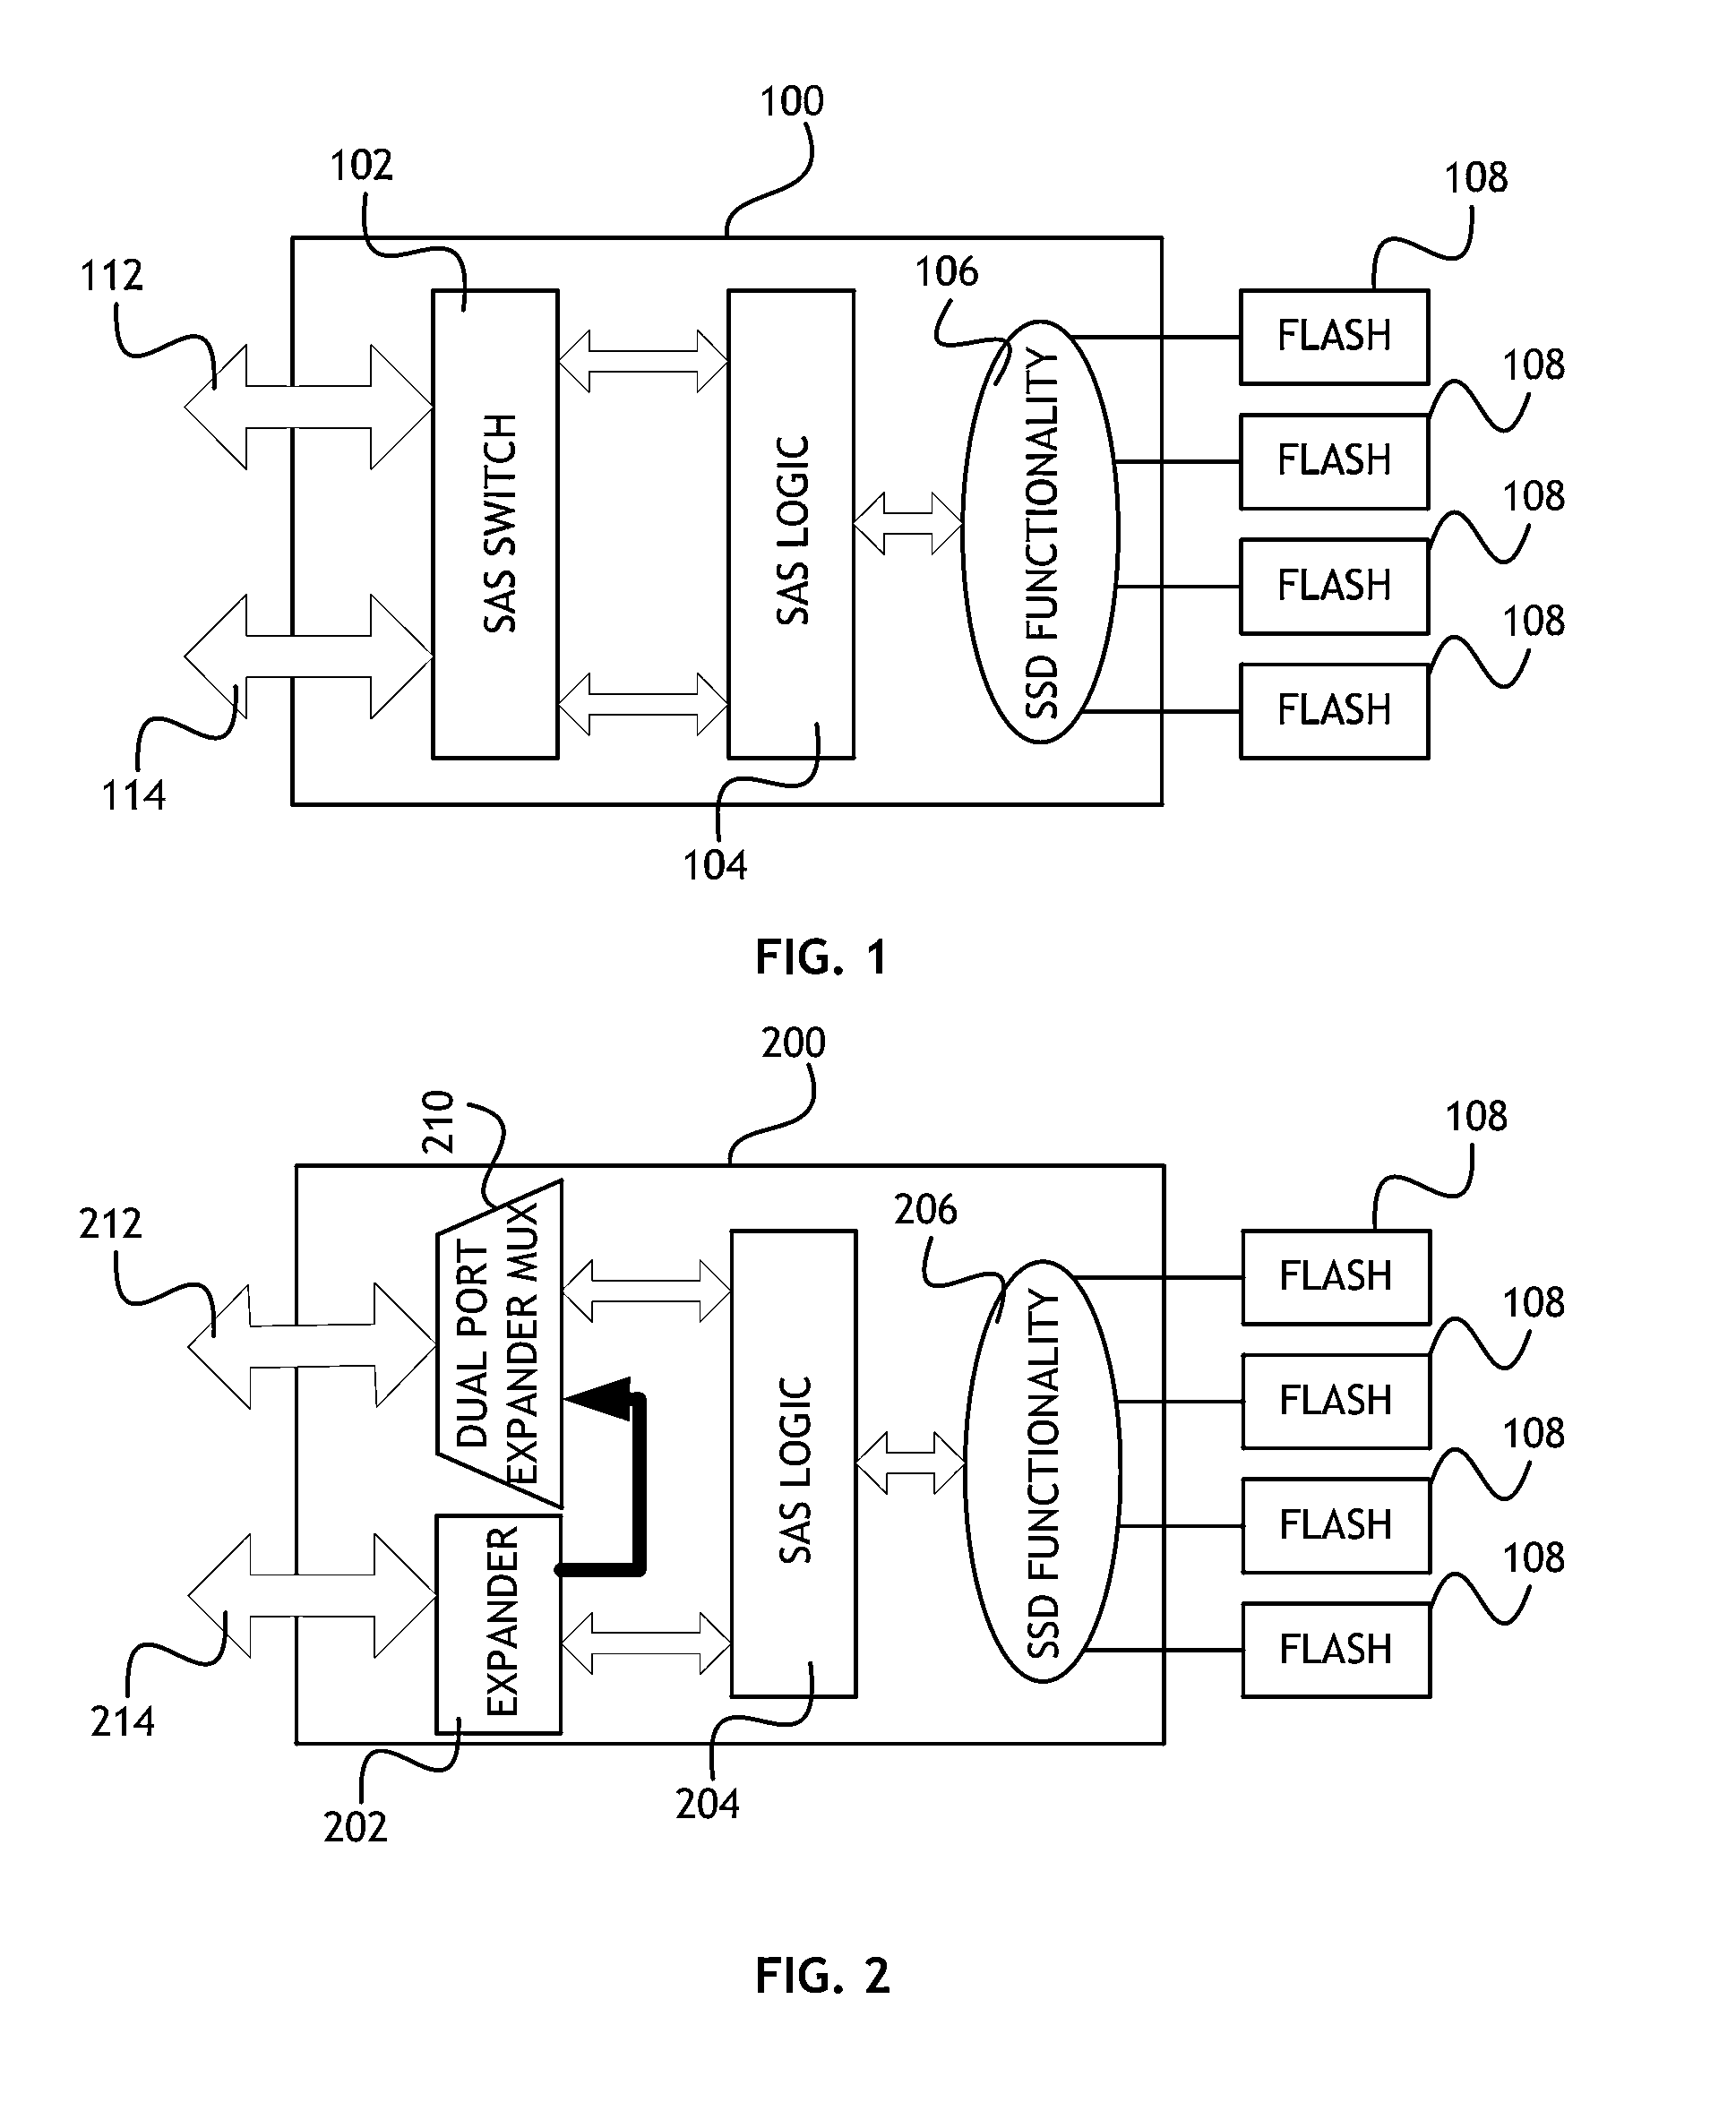 Storage processor for efficient scaling of solid state storage